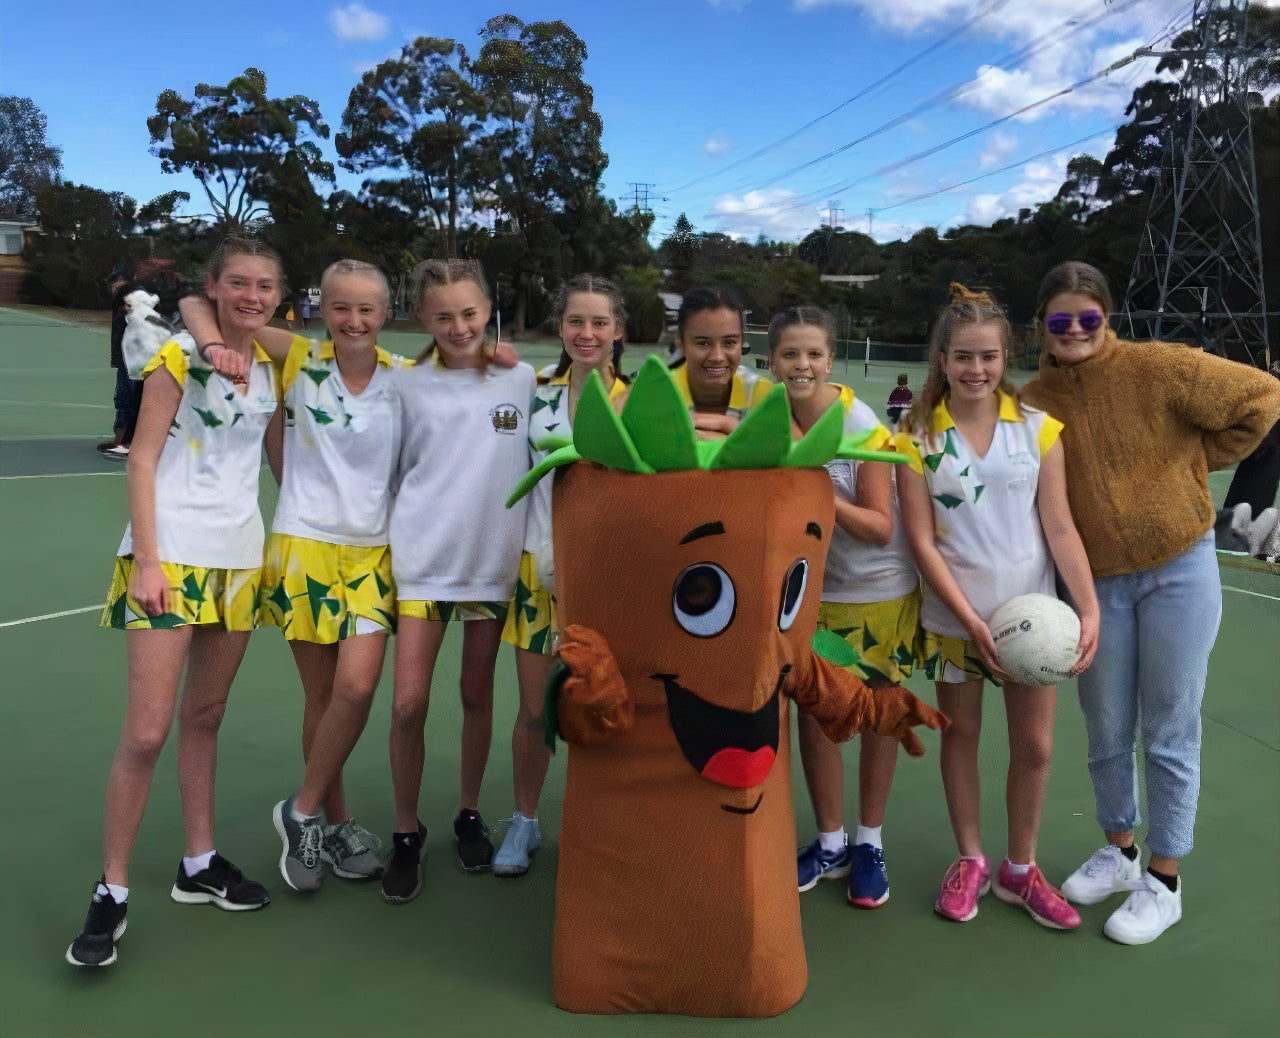 How Netball Promotes Fitness and Well-being in the Sutherland Shire Community